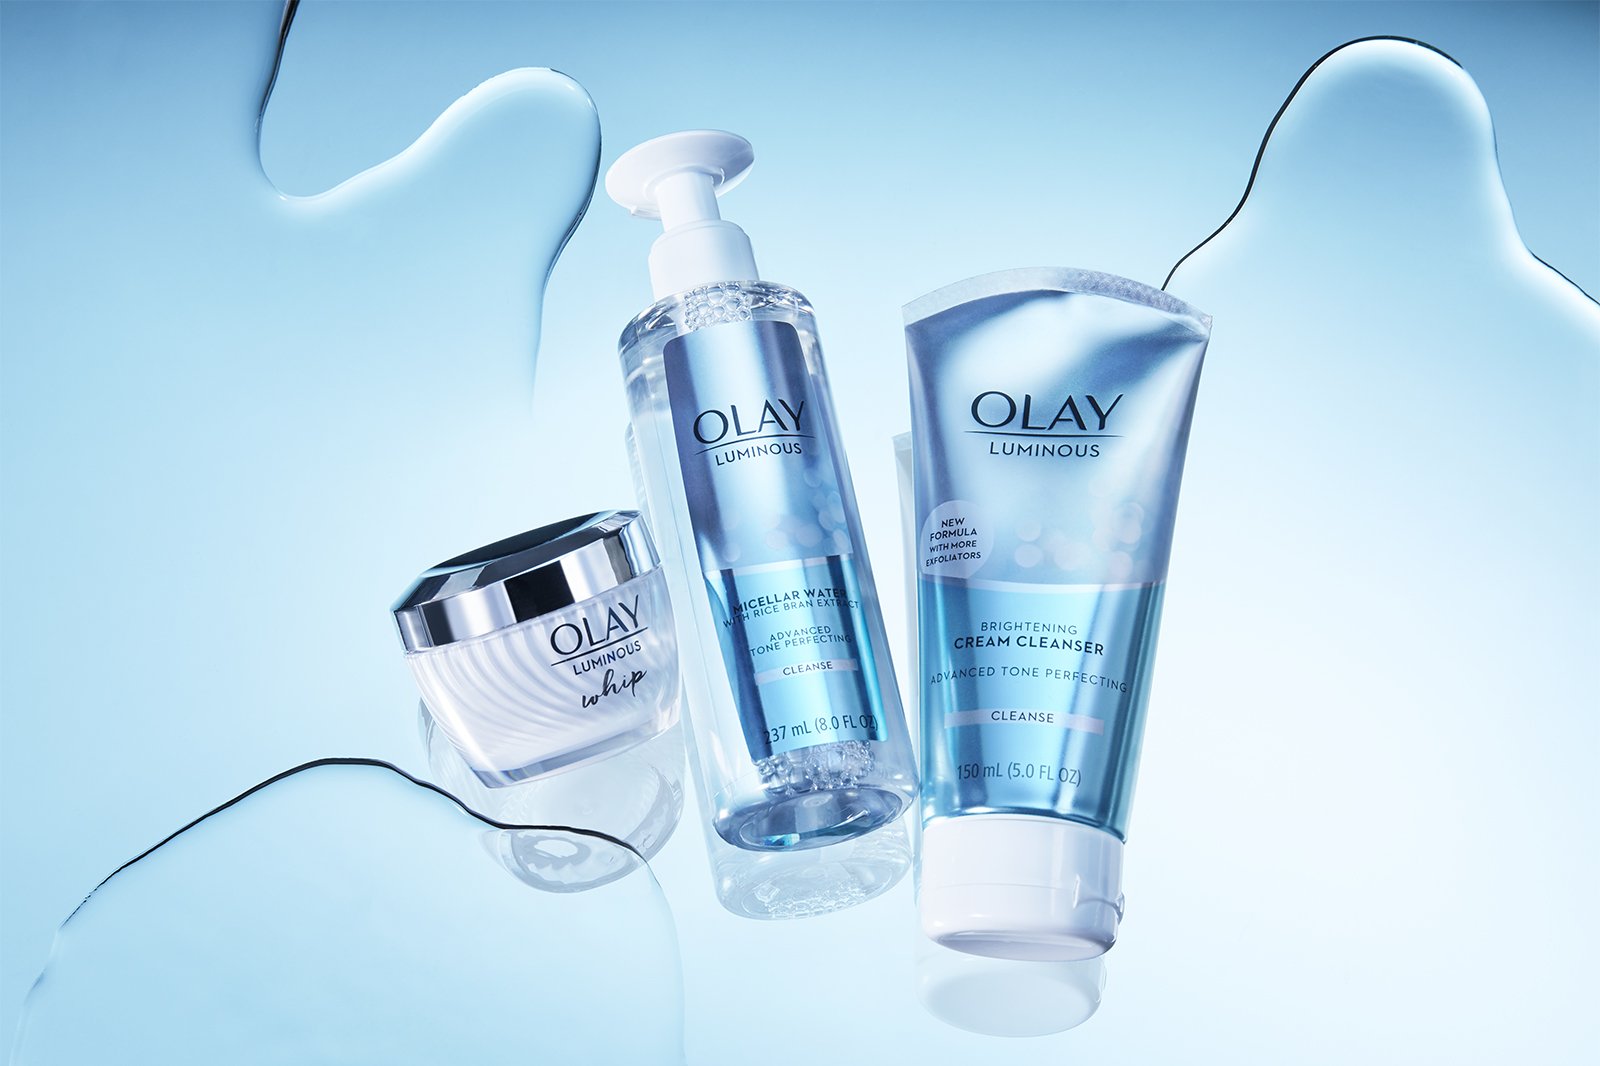 Olay Product Family after photo retouching